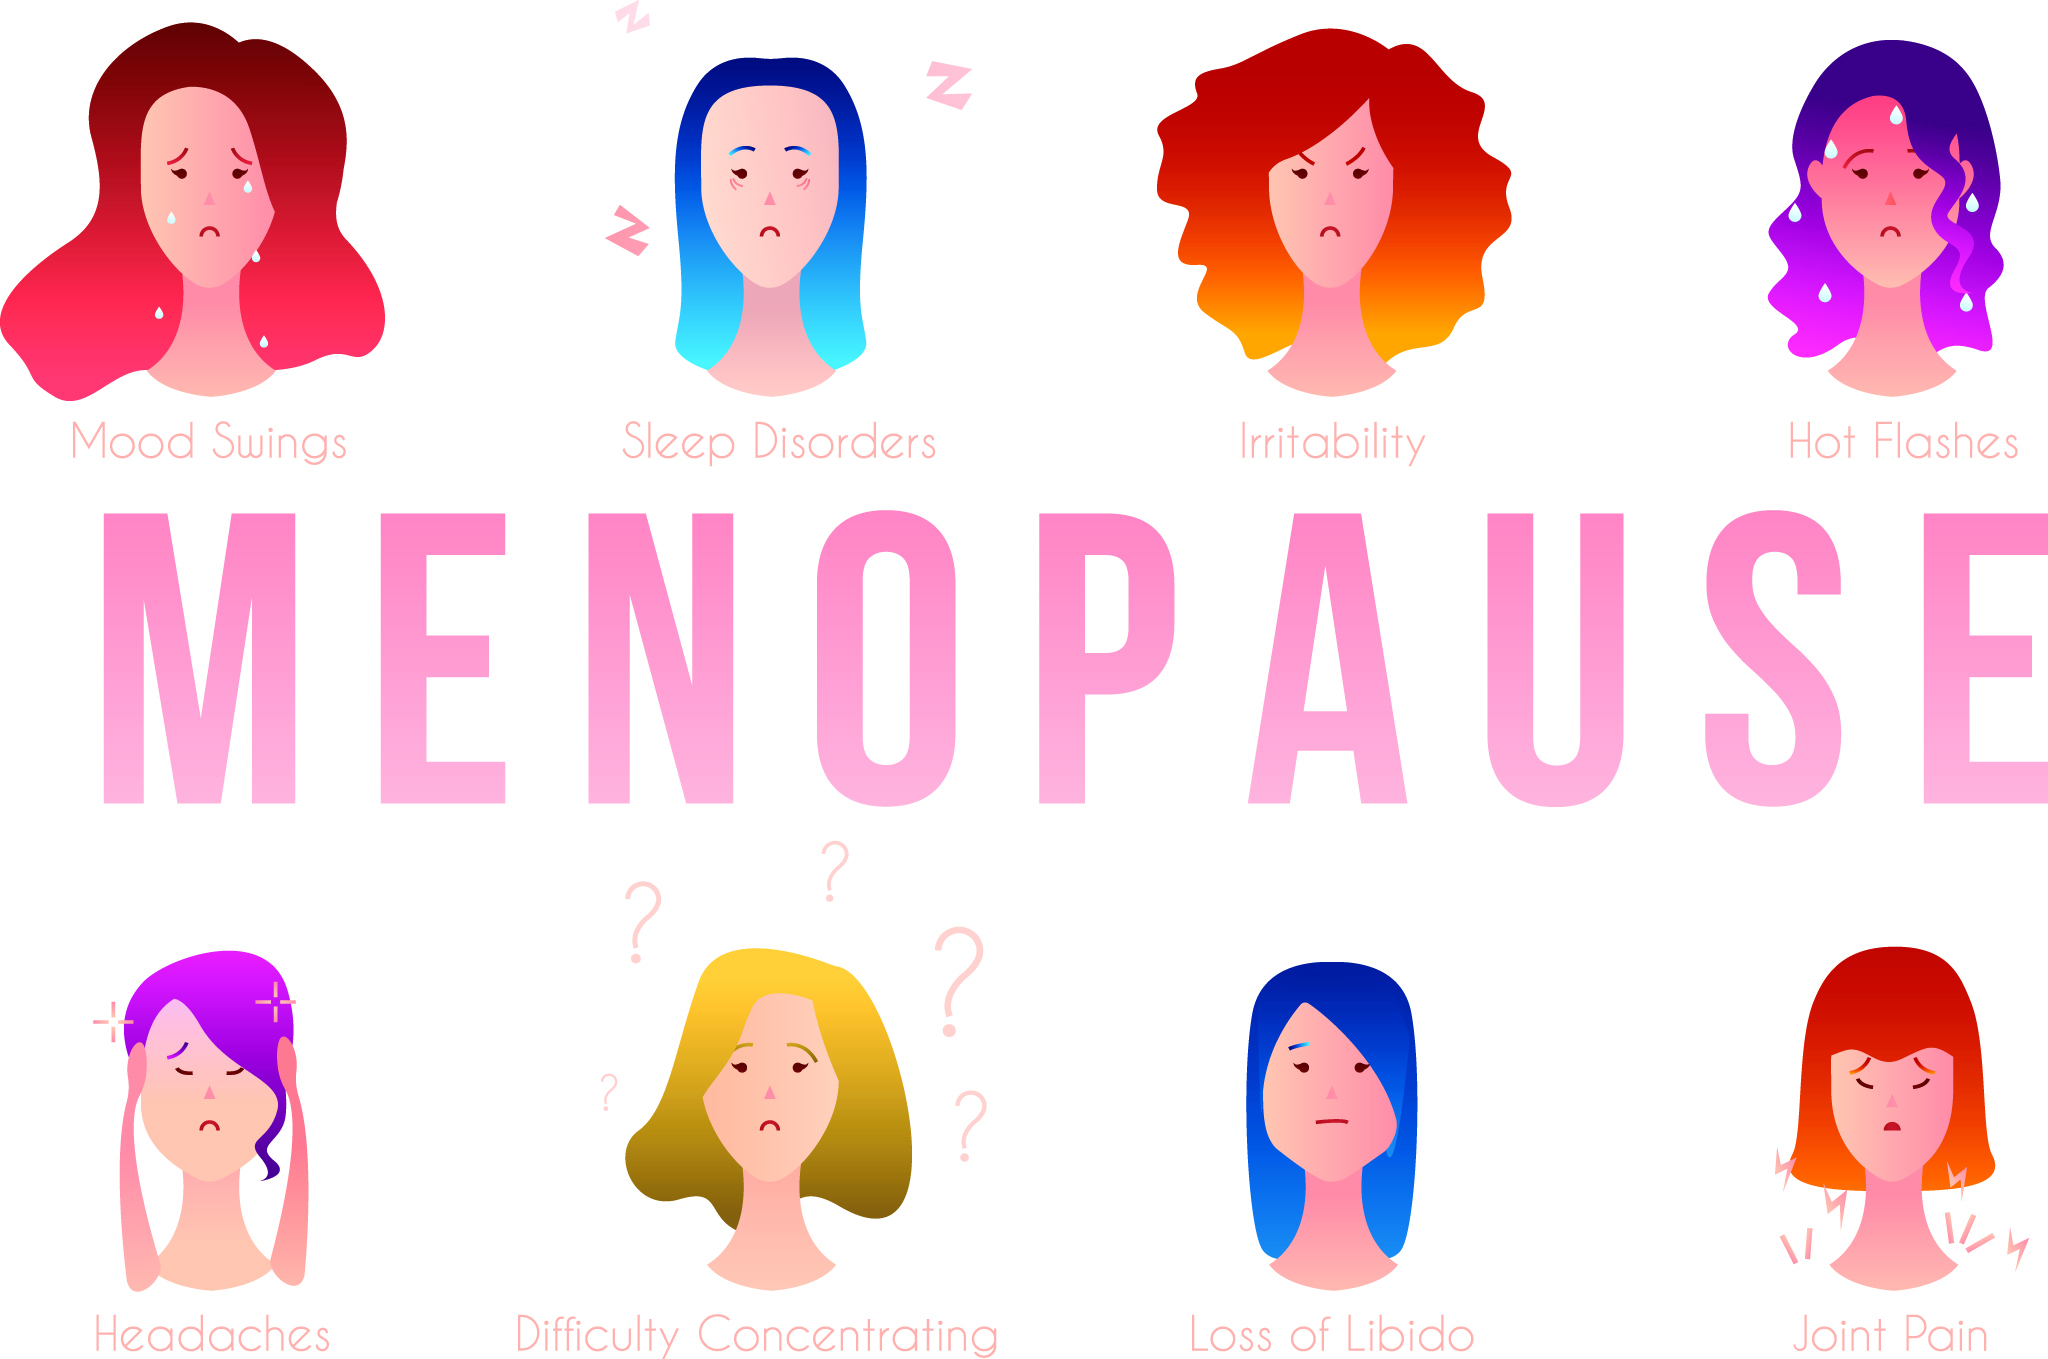 Menopause rage: Let's talk about the link between menopause and divorce